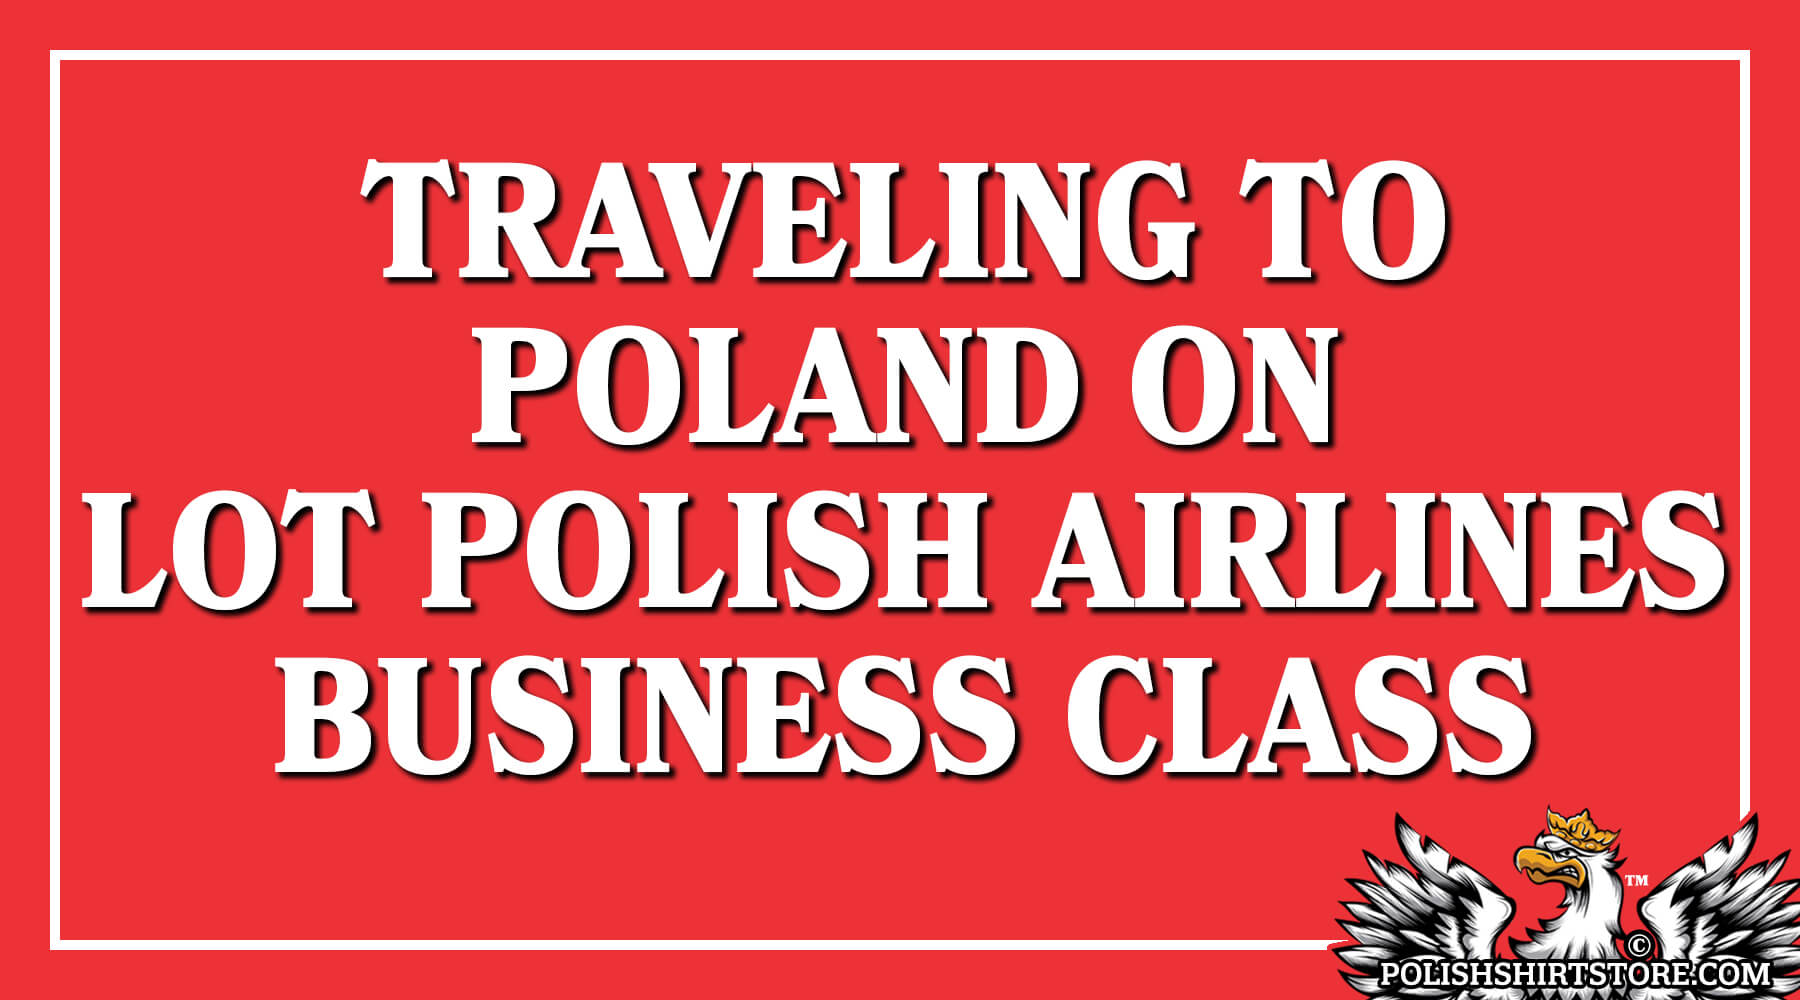 Lot Polish Airlines Business Class